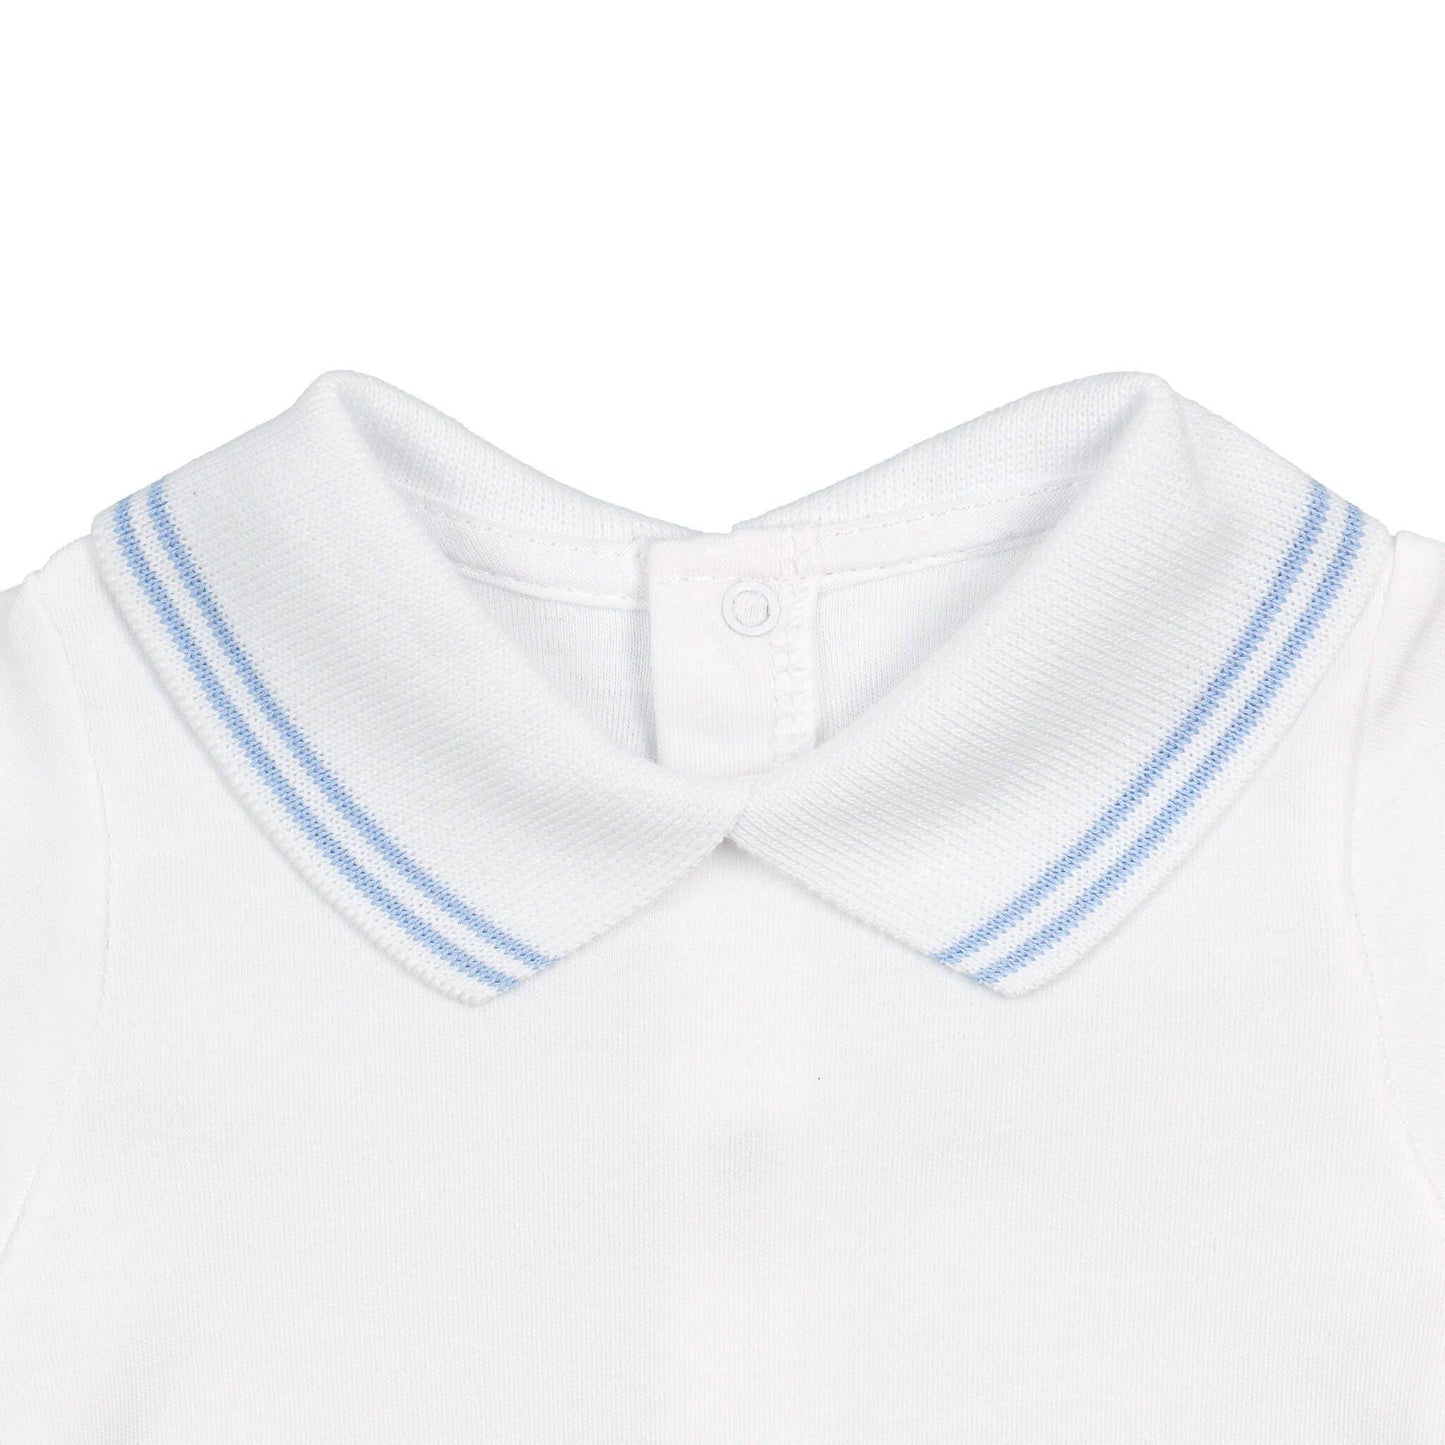 Cotton Baby Bodysuit Onesie with Polo-Style Collar: 1-3M / Long Sleeve / Light Blue